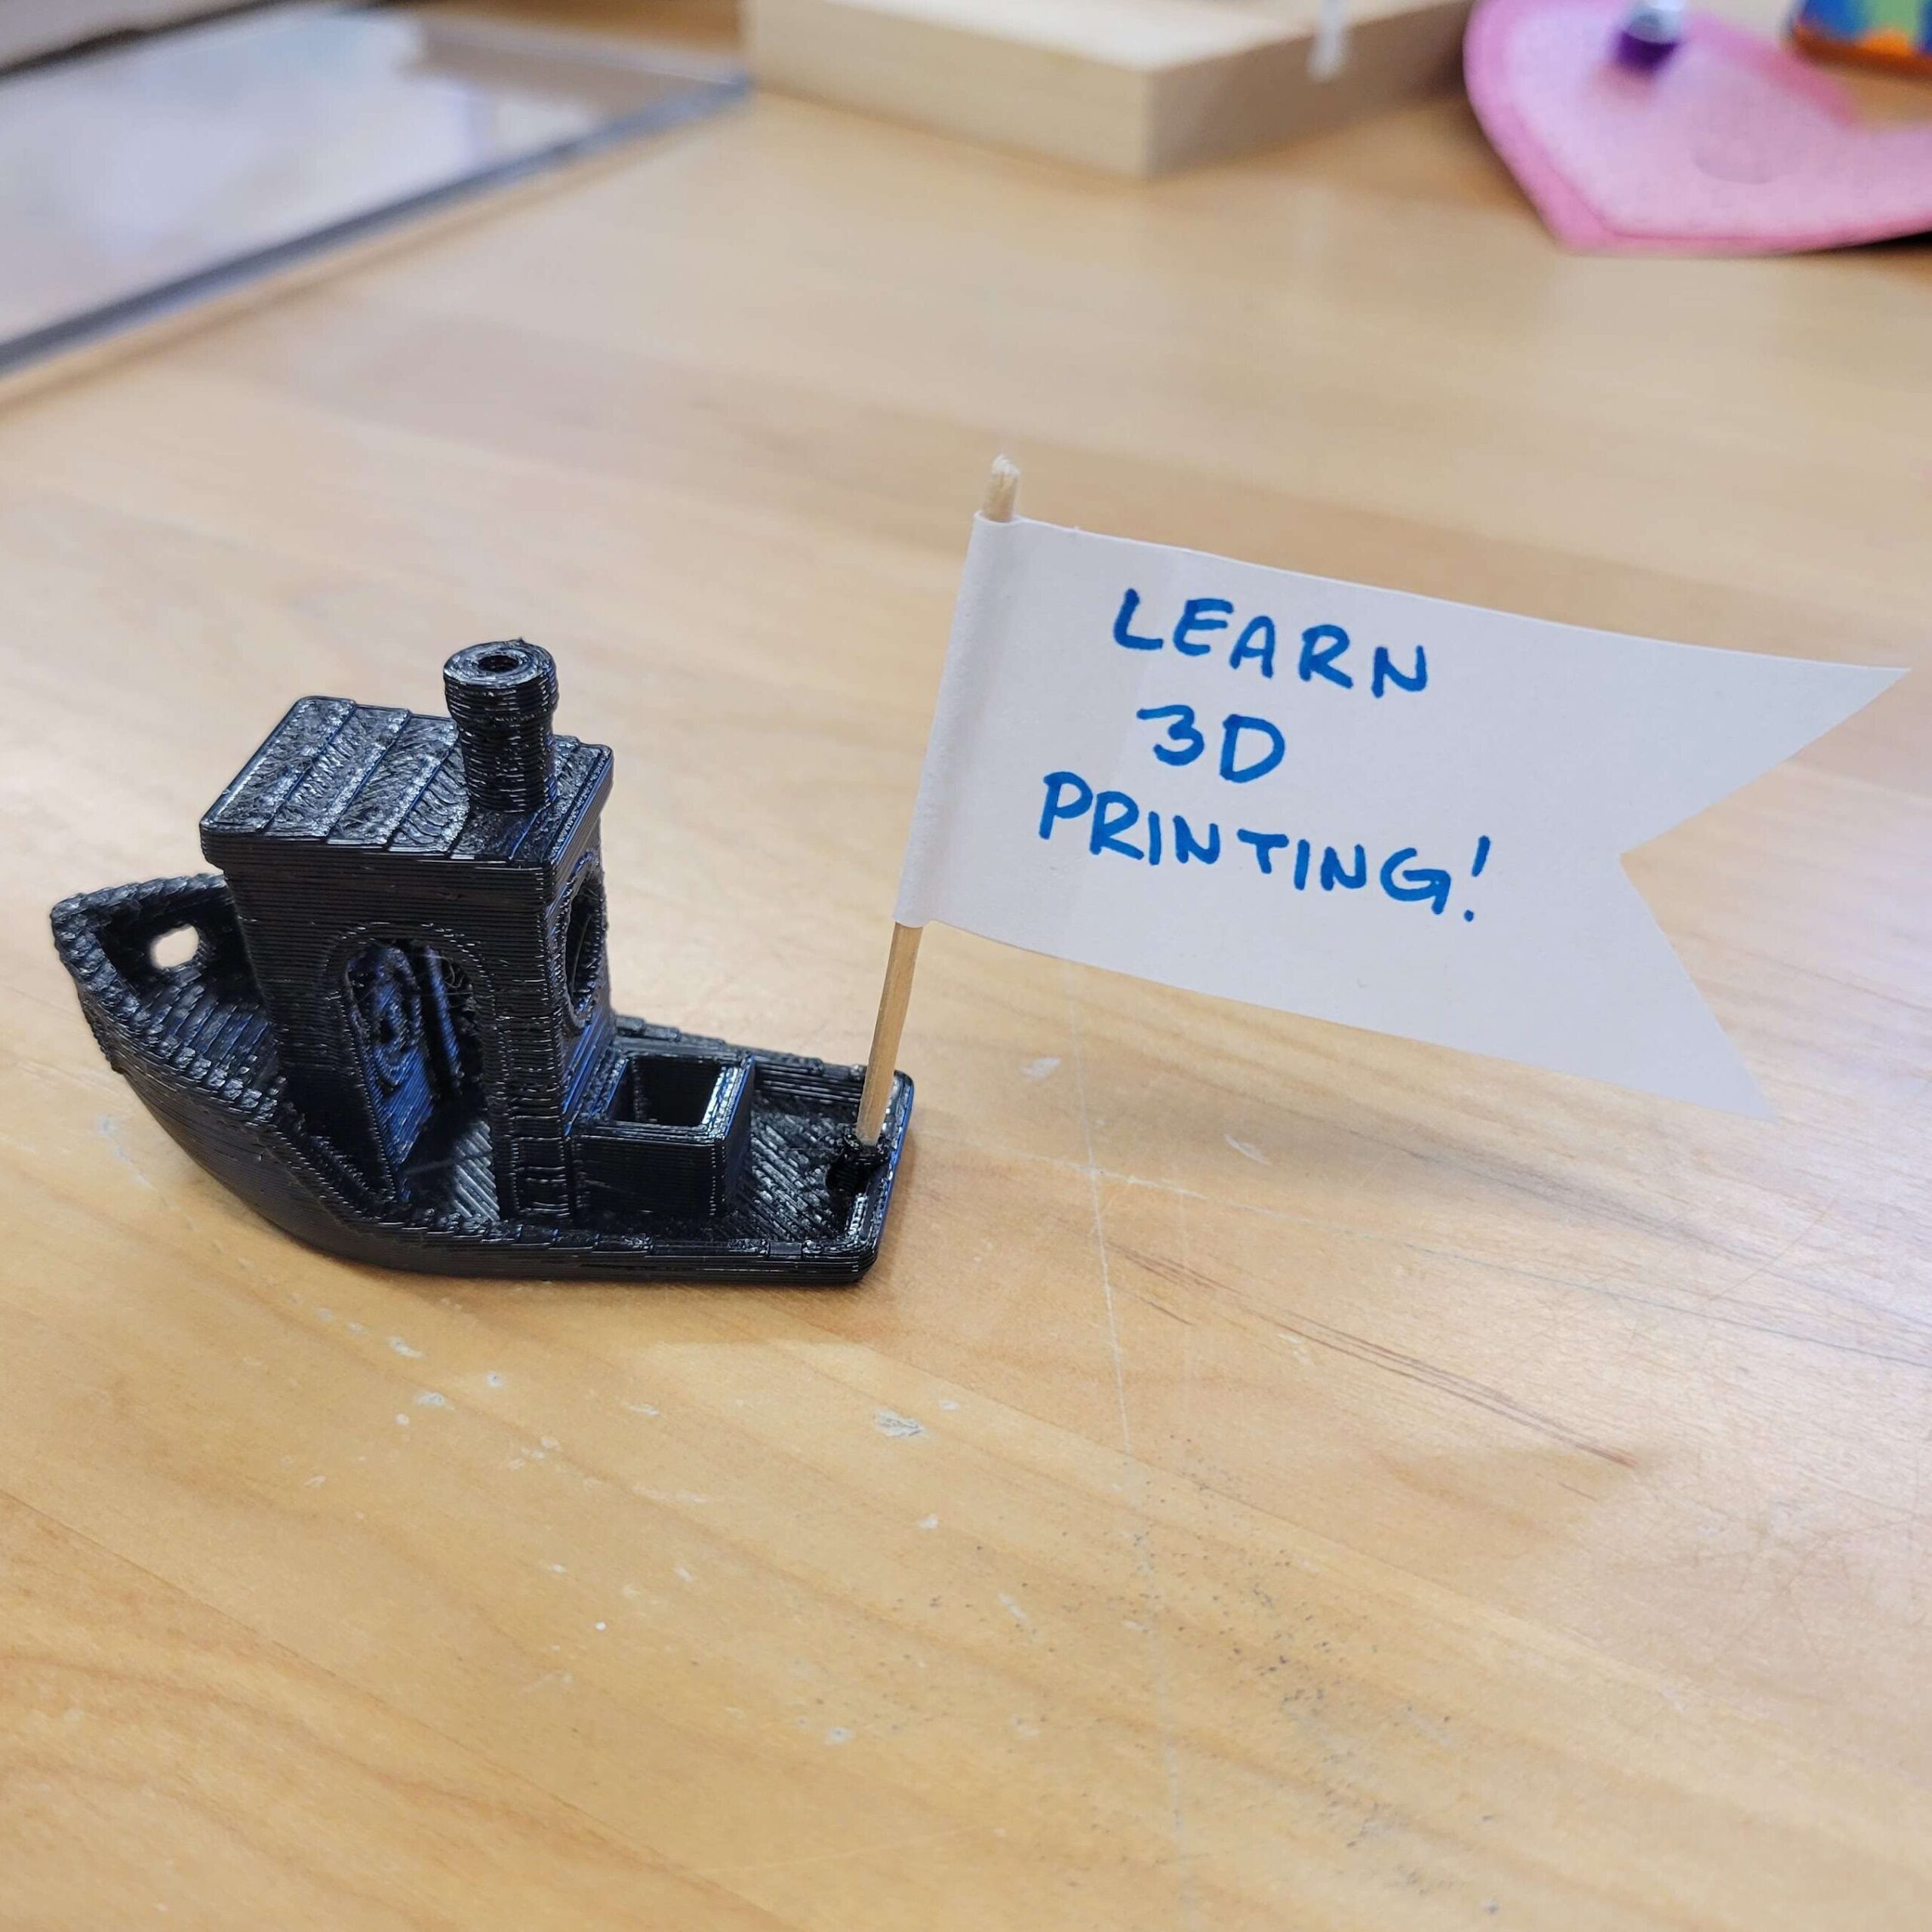 A small black 3D printed tugboat with a banner that reads "Learn 3D Printing".